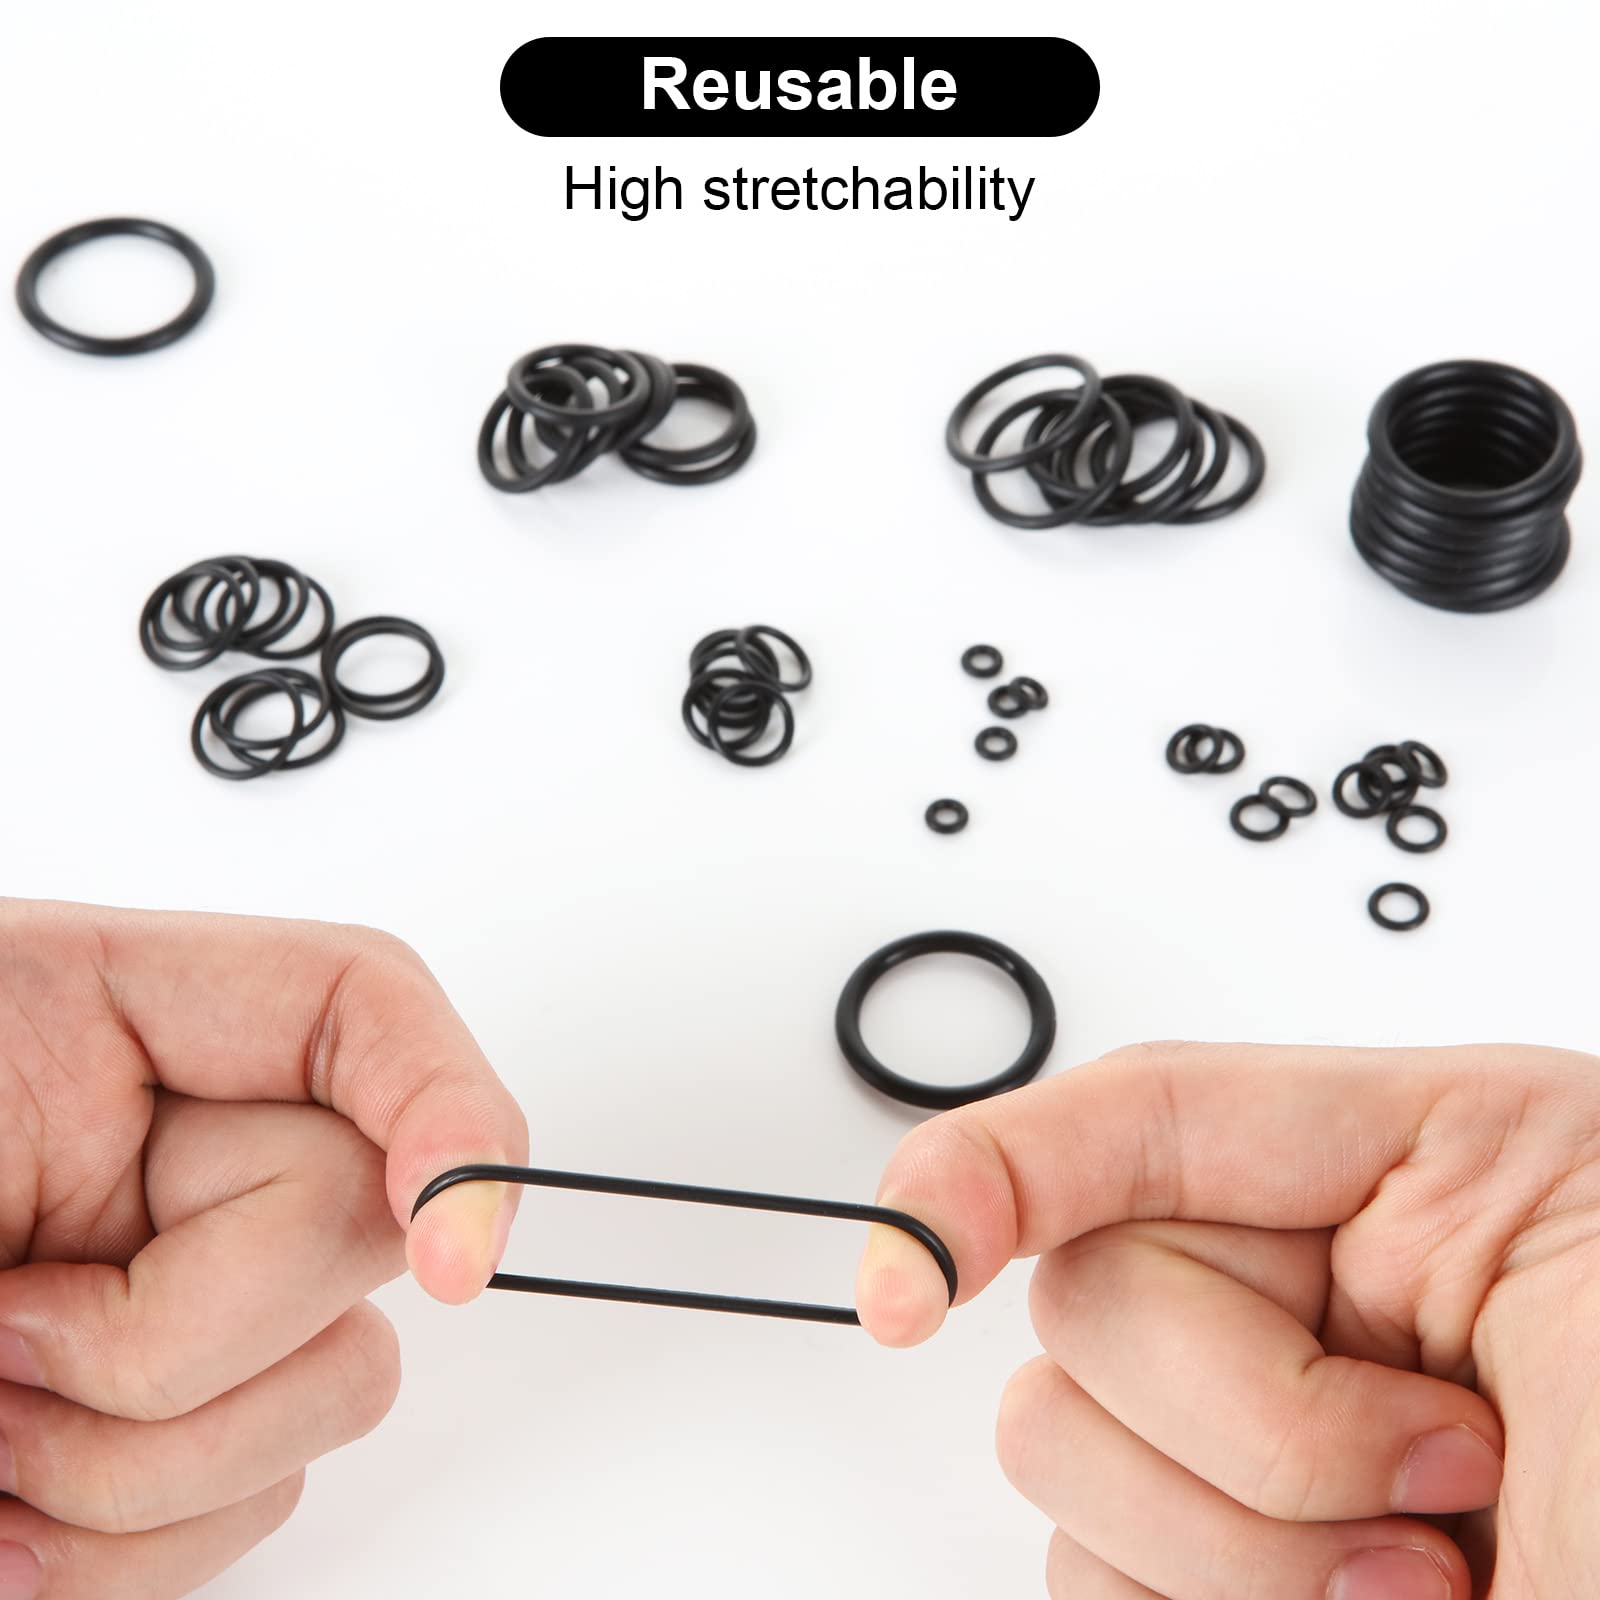 740pcs Rubber O Ring 24 Sizes Sealing Oil Resistance O-Ring Washer